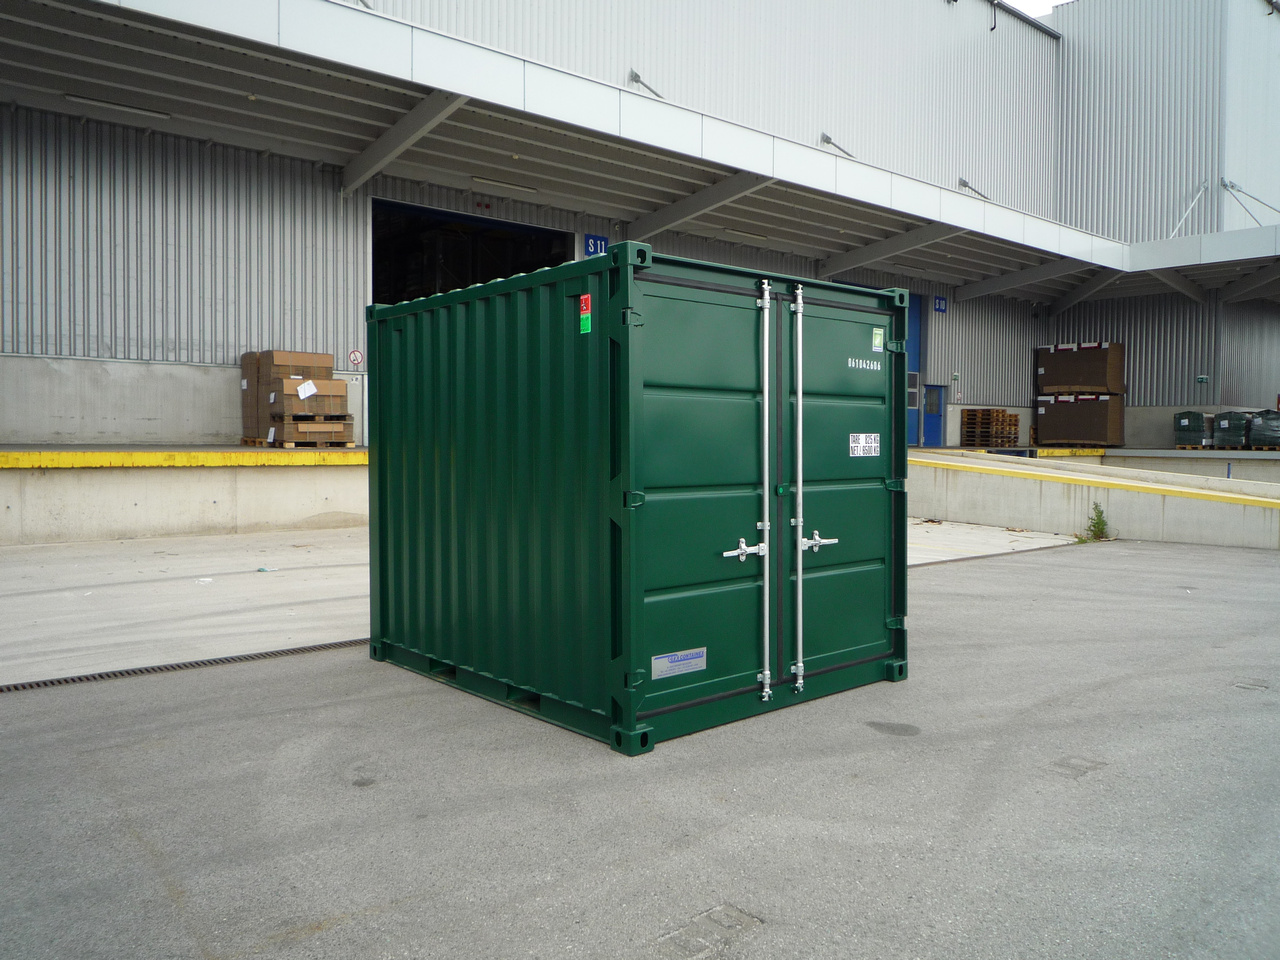 Grøn 10 fods lagercontainer fra Containex, RAL 6005.